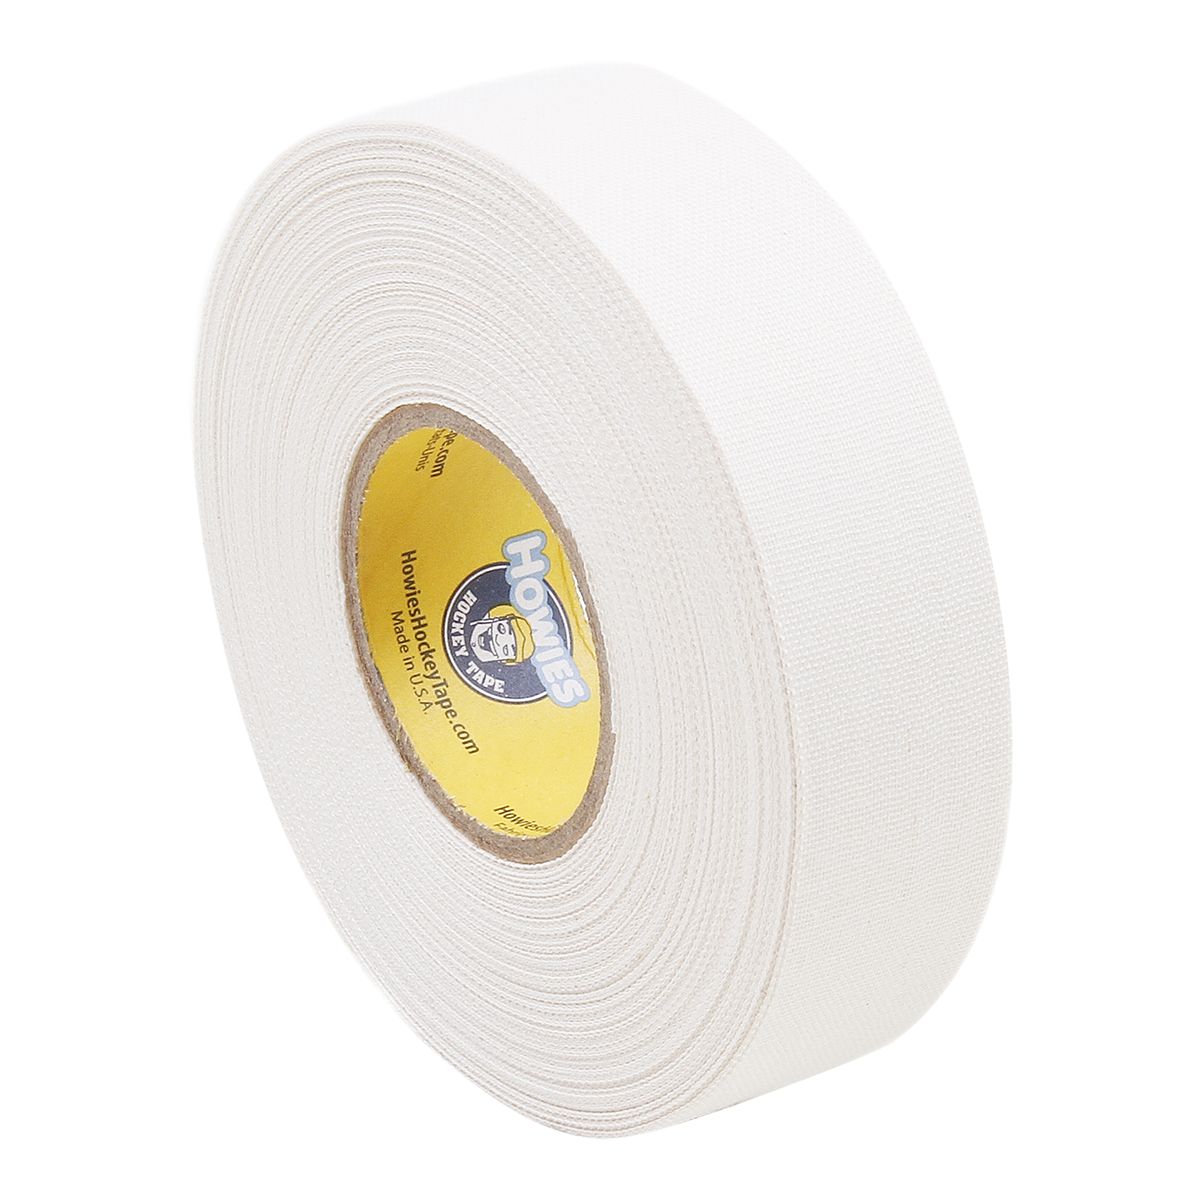 Howies 1" X 24yd Cloth Tape